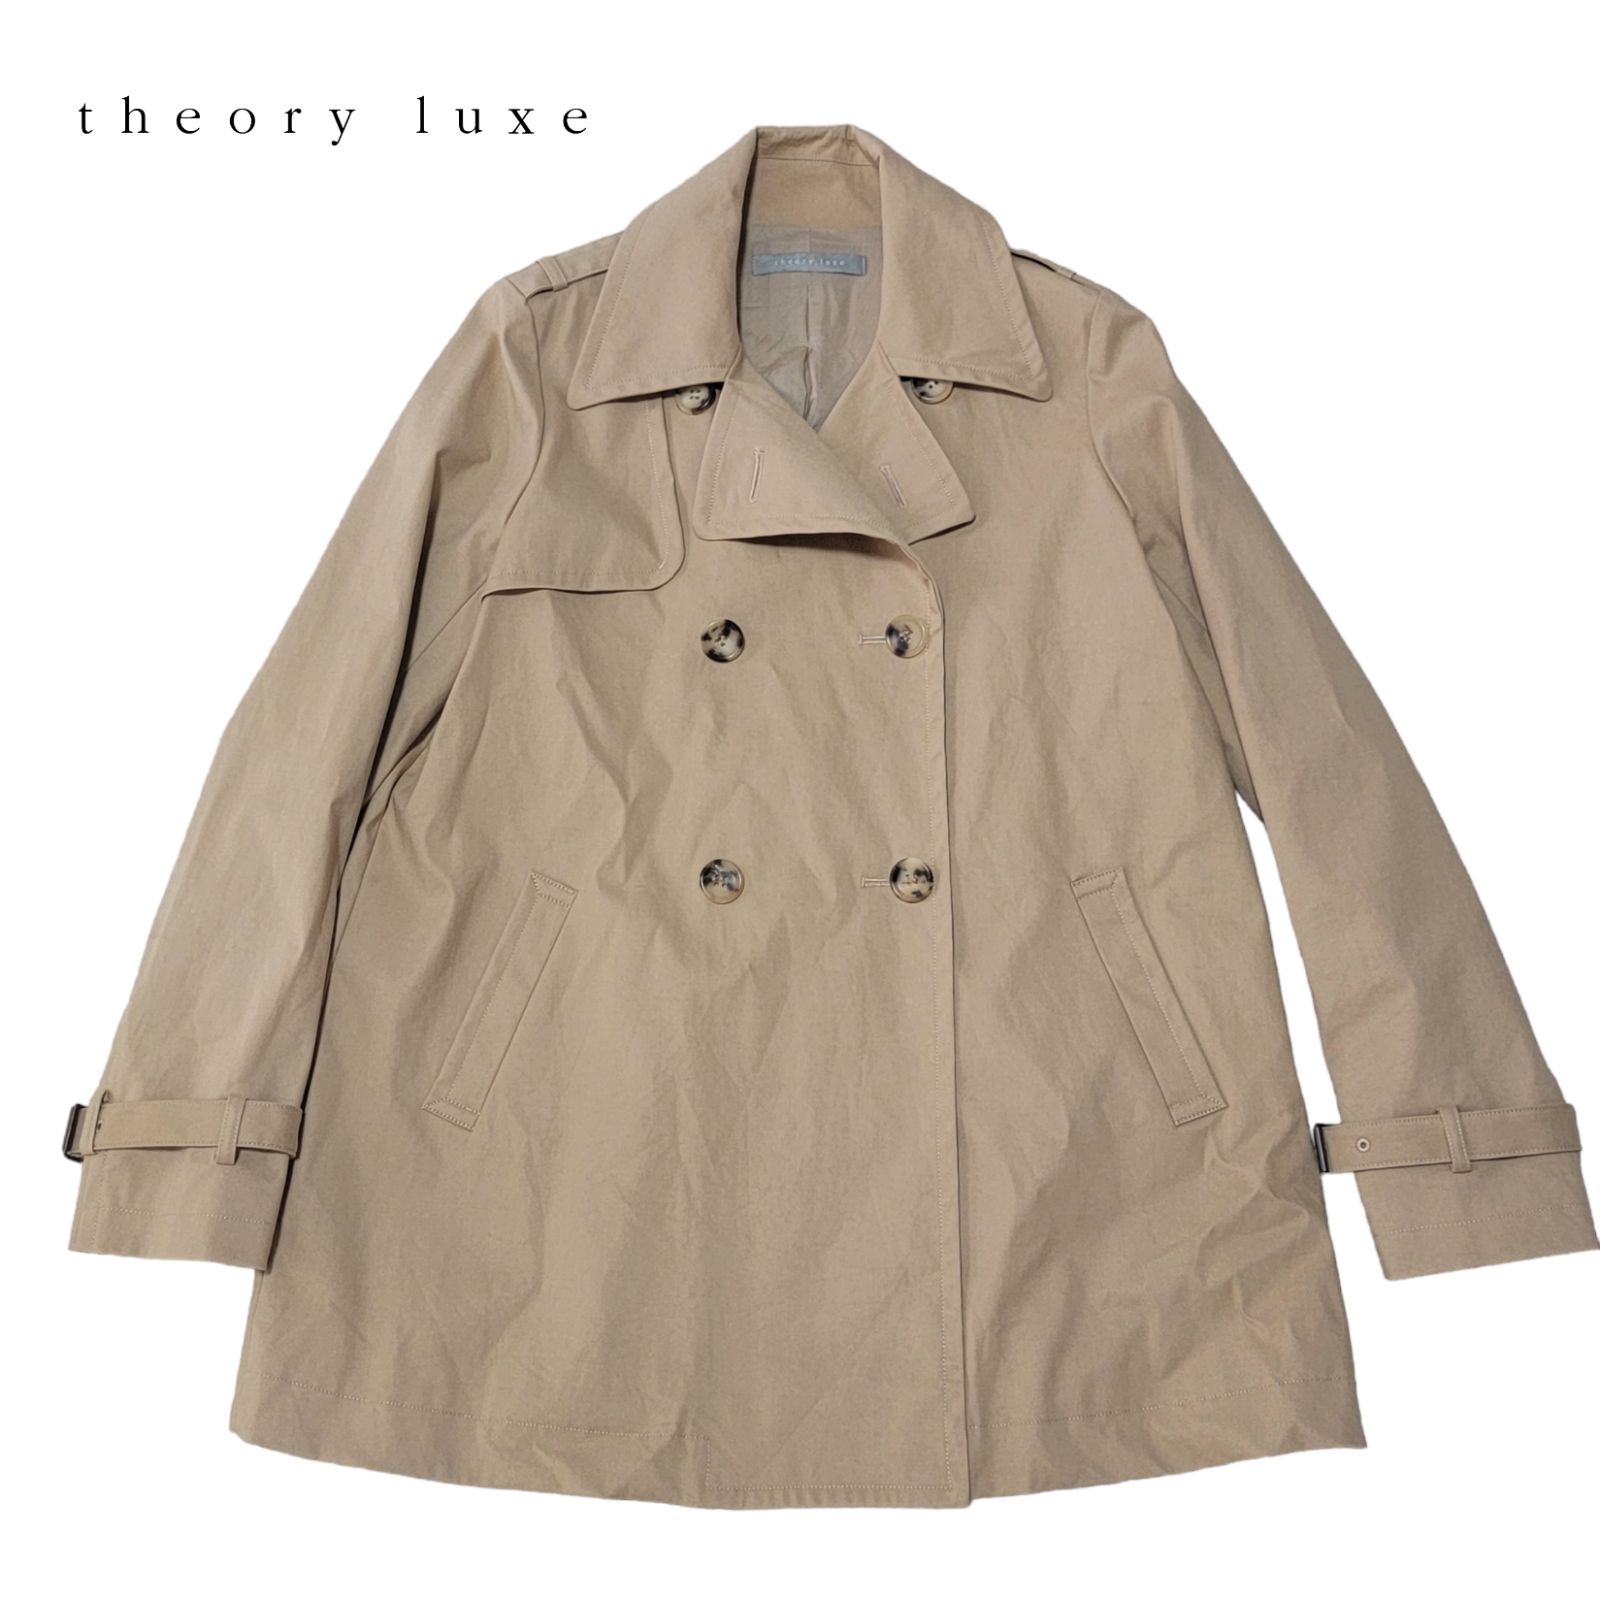 theory luxe　トレンチコート